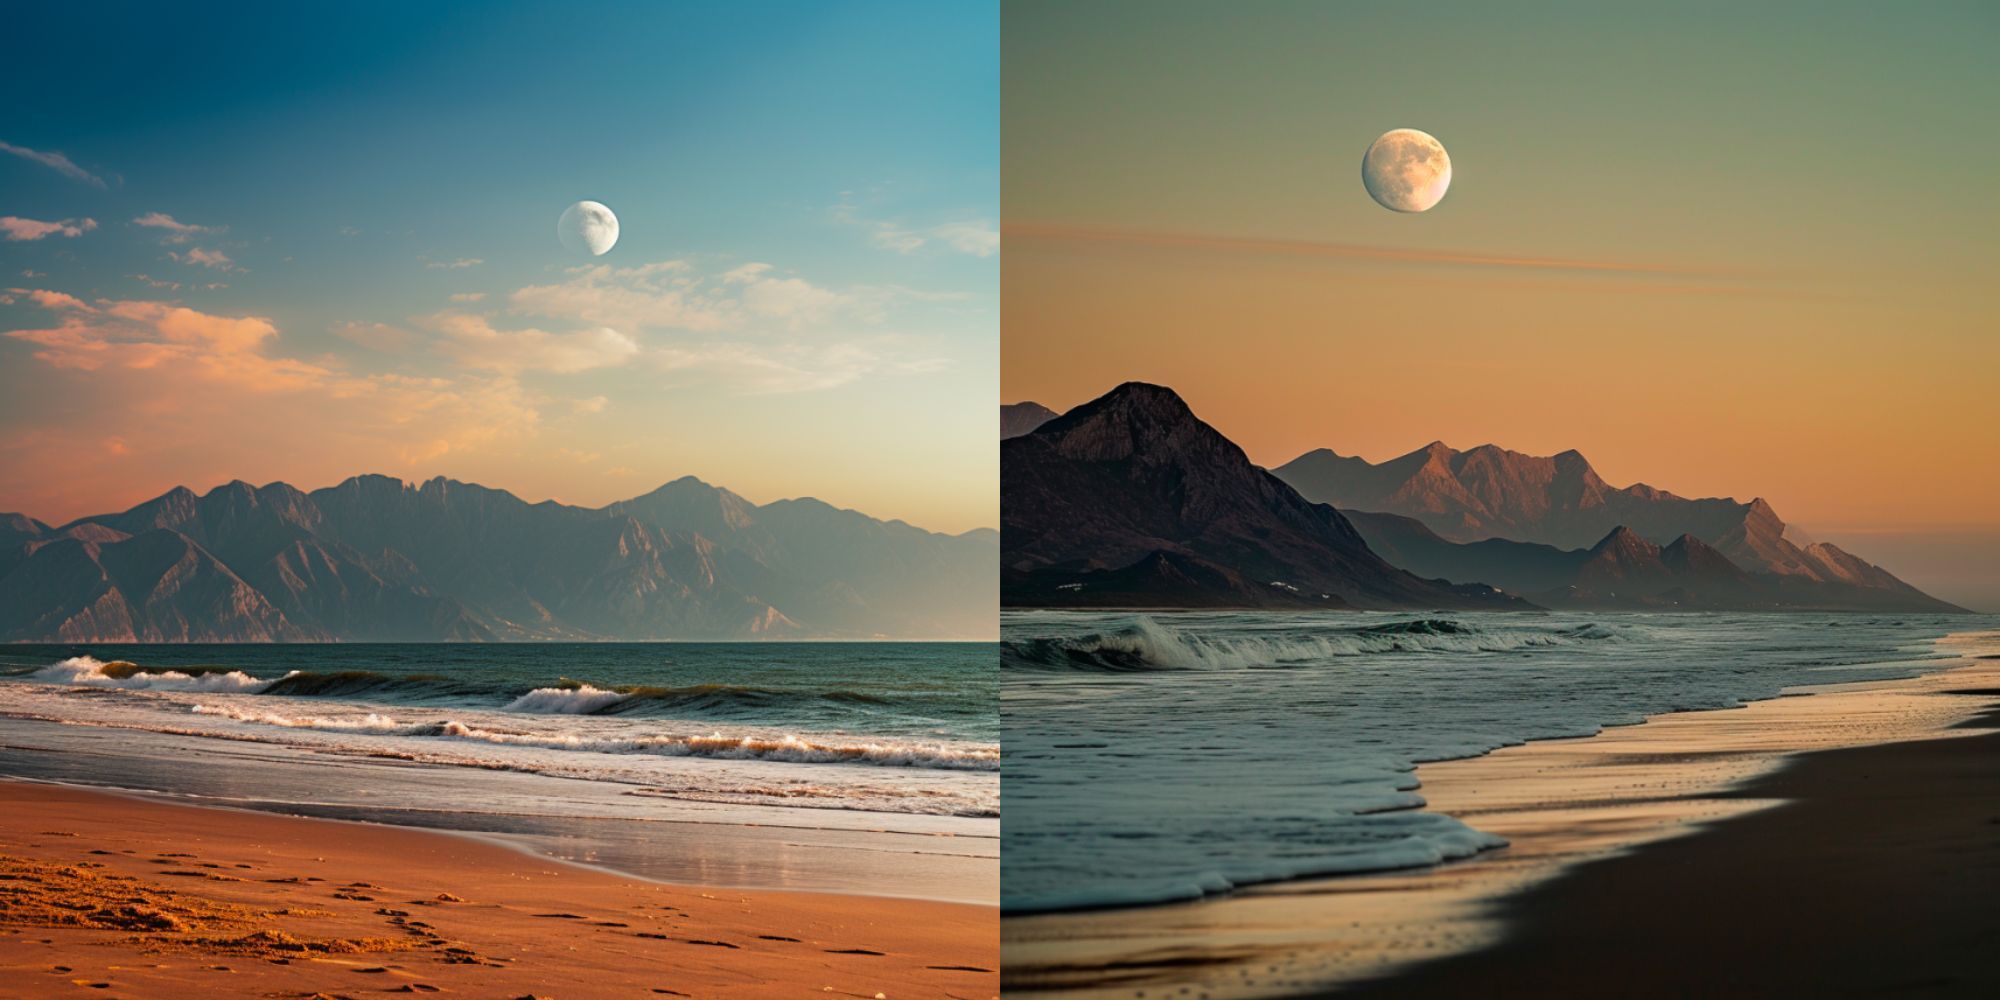 An AI-generated pair of images side-by-side of A nature photograph of mountains as seen from the beach, with a large visible moon in the sky.